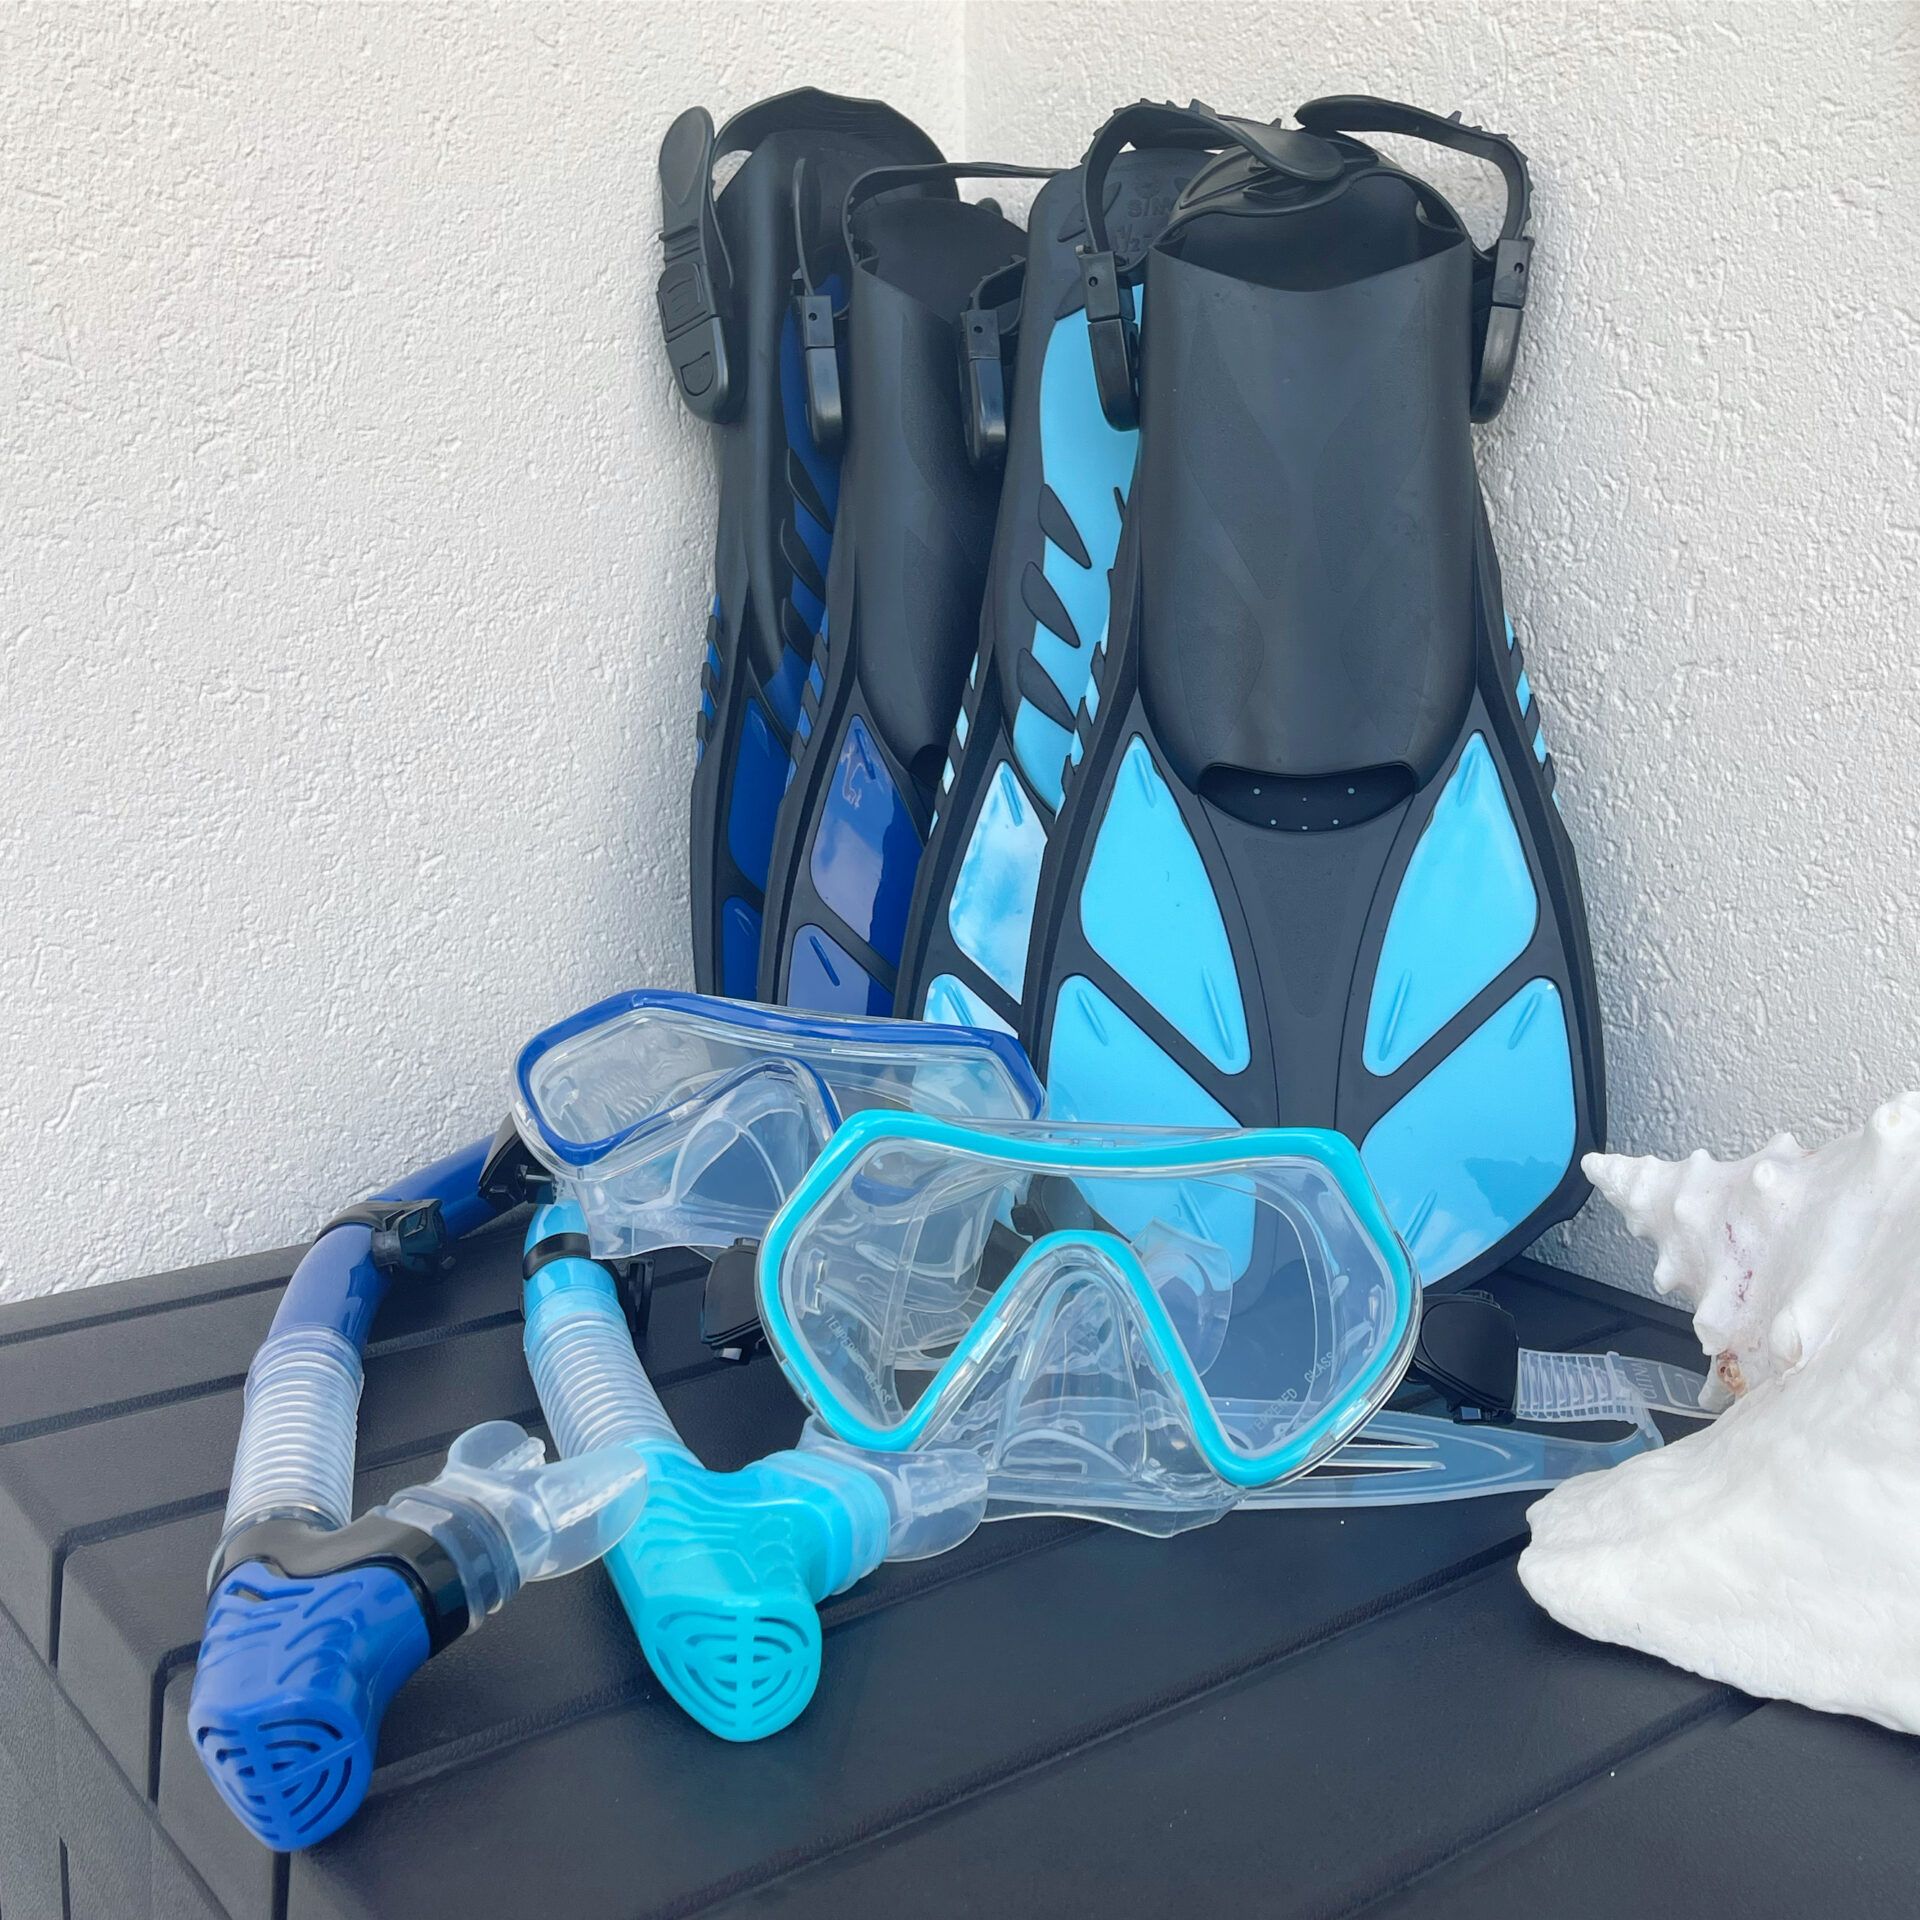 Brand new snorkeling gear for our guests to enjoy during their stay.